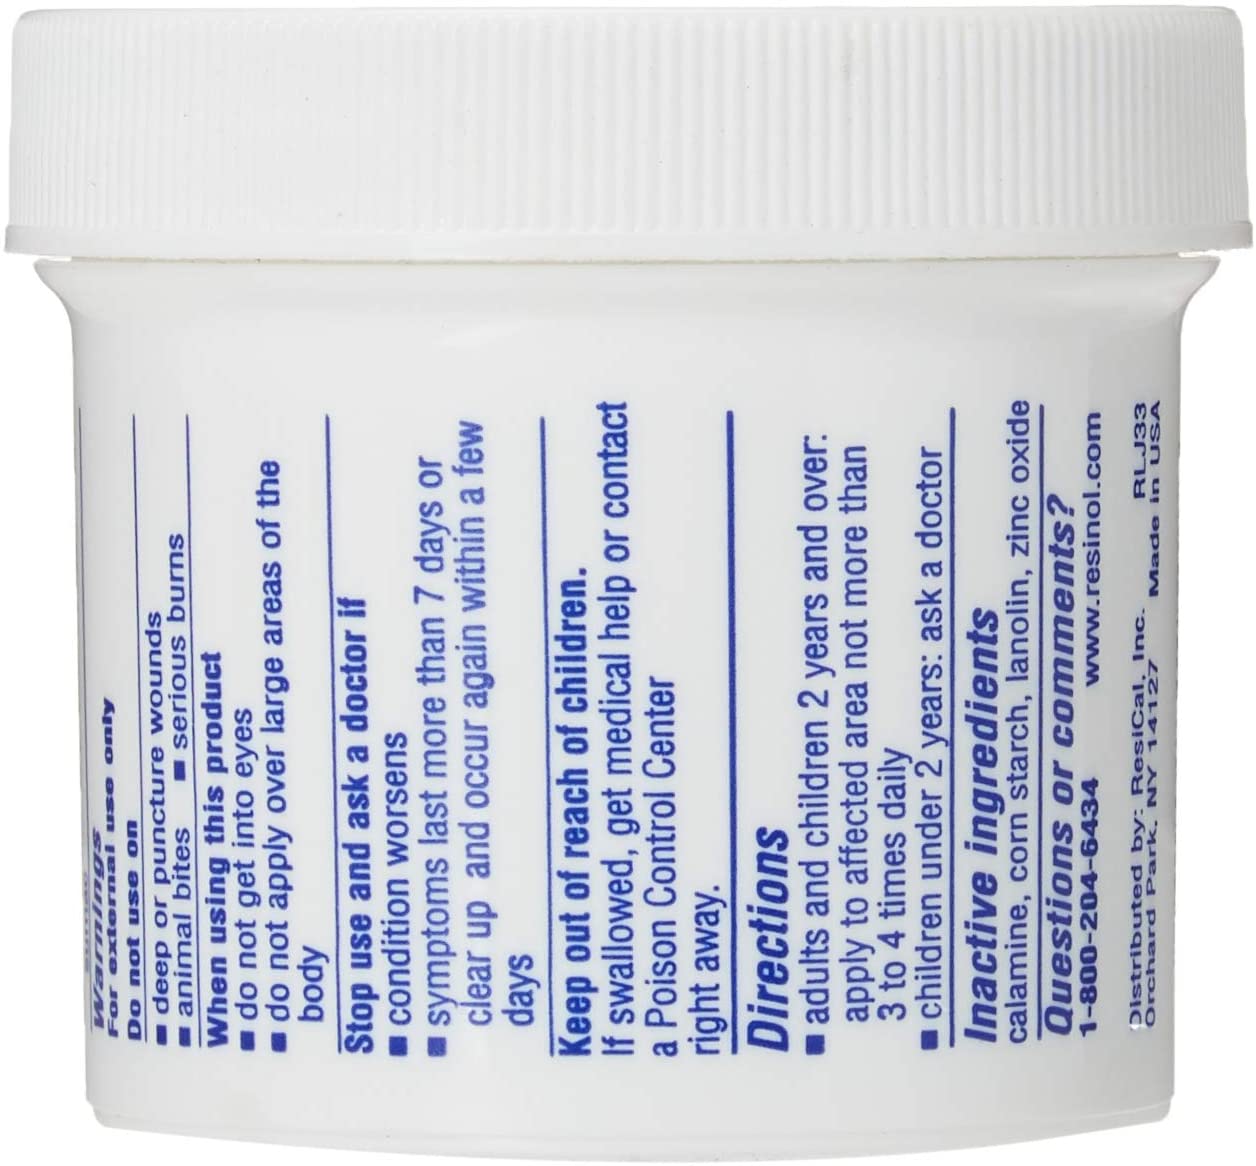 Resinol Topical Analgesic/Skin Protectant Medicated Ointment - 3.3 oz